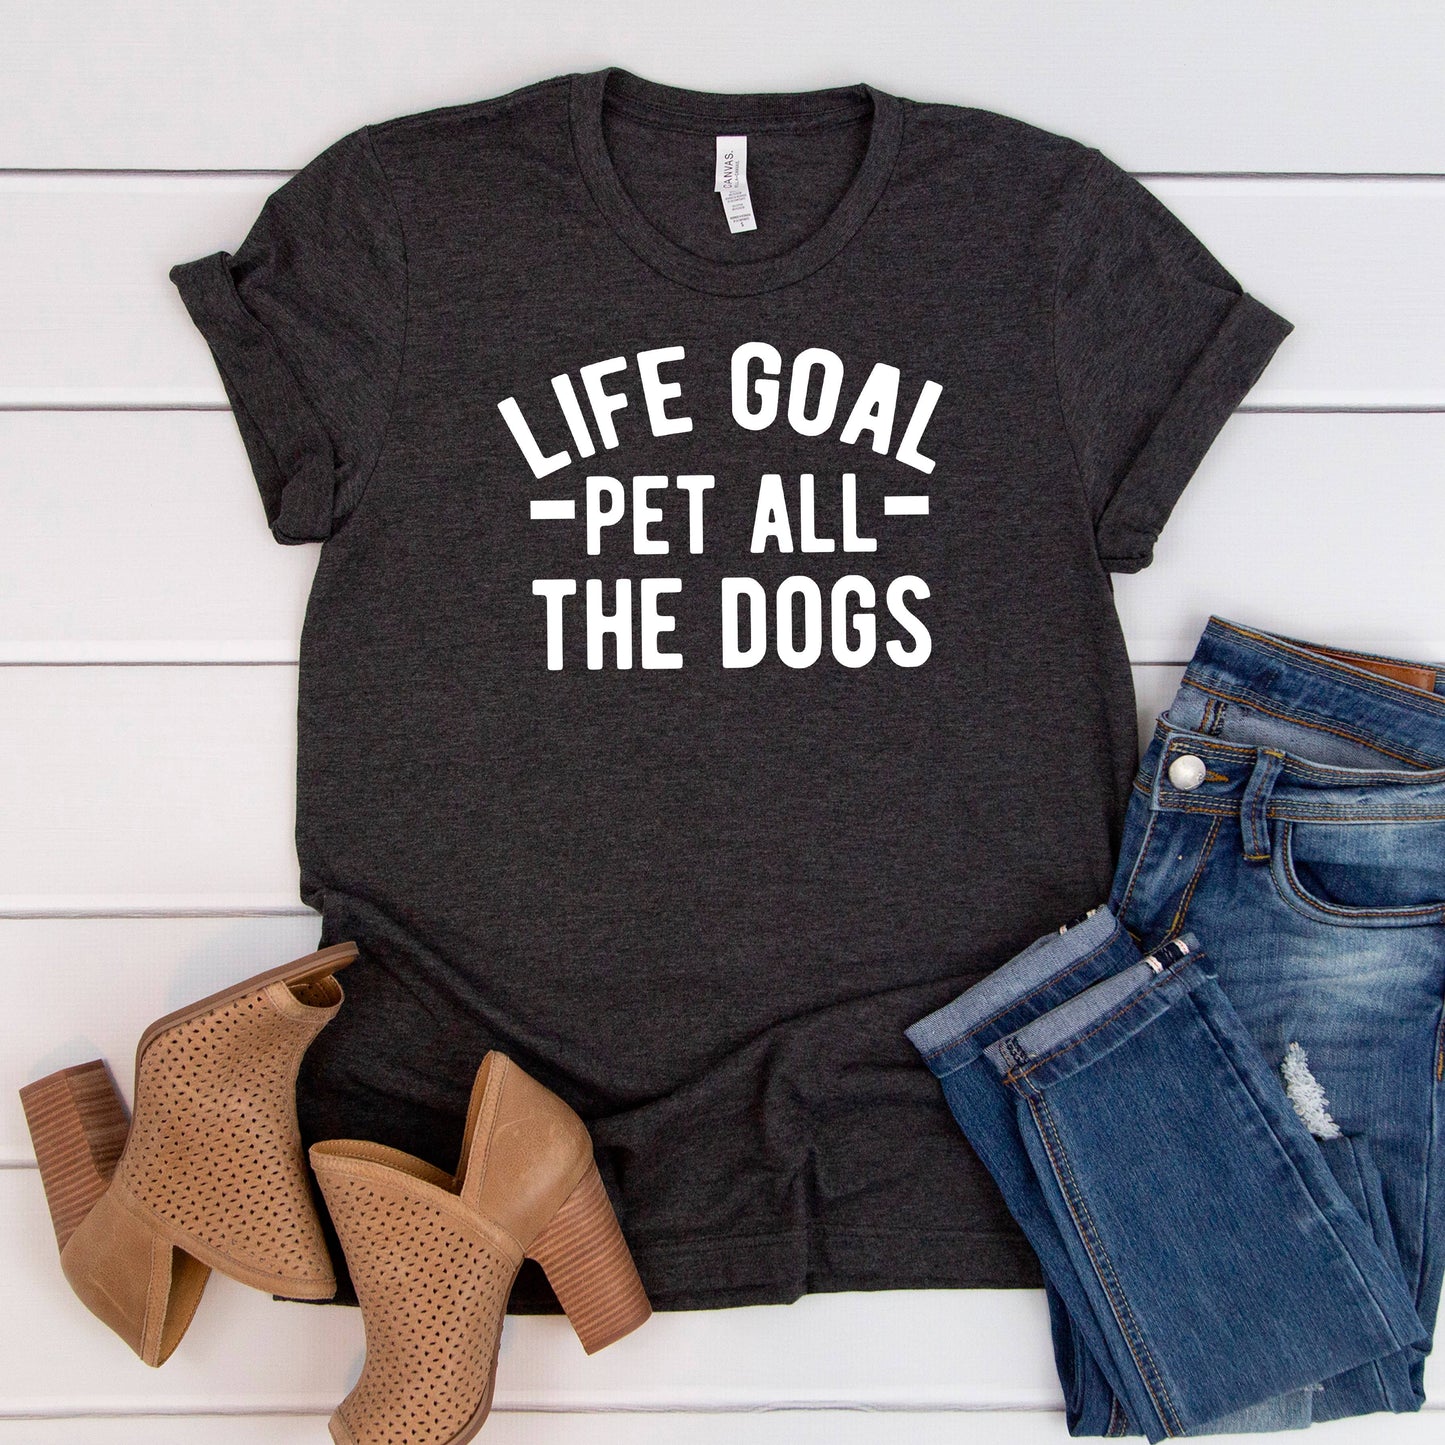 Life Goal Pet All the Dogs Tshirt